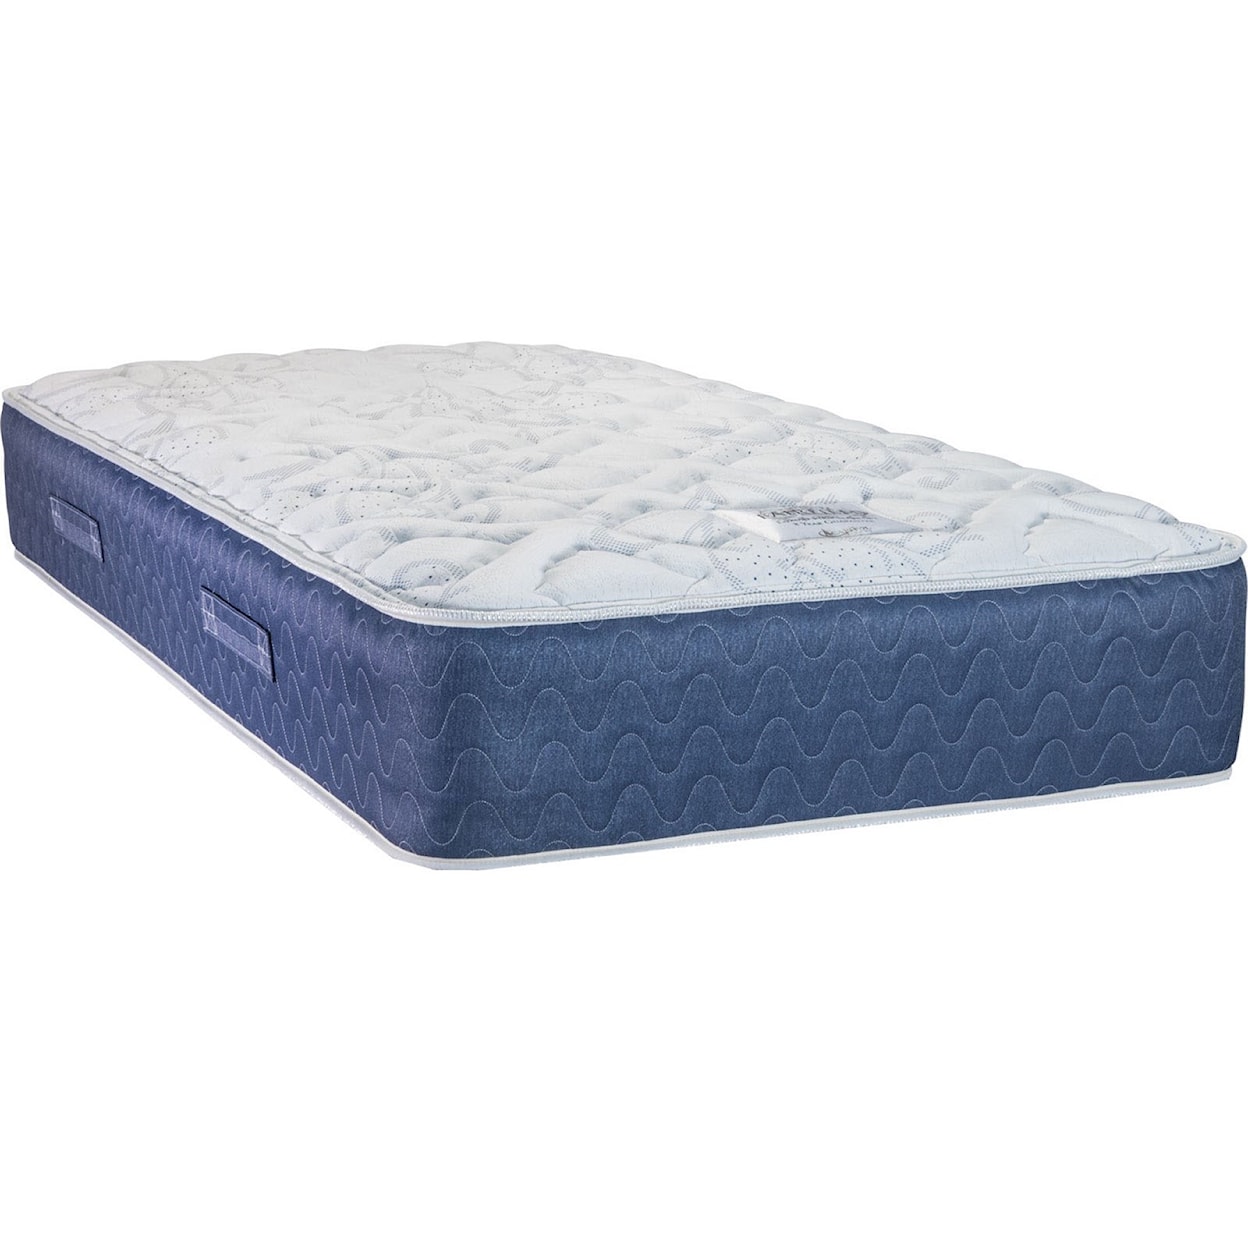 Capitol Bedding Melbourne Firm Full Mattress Only